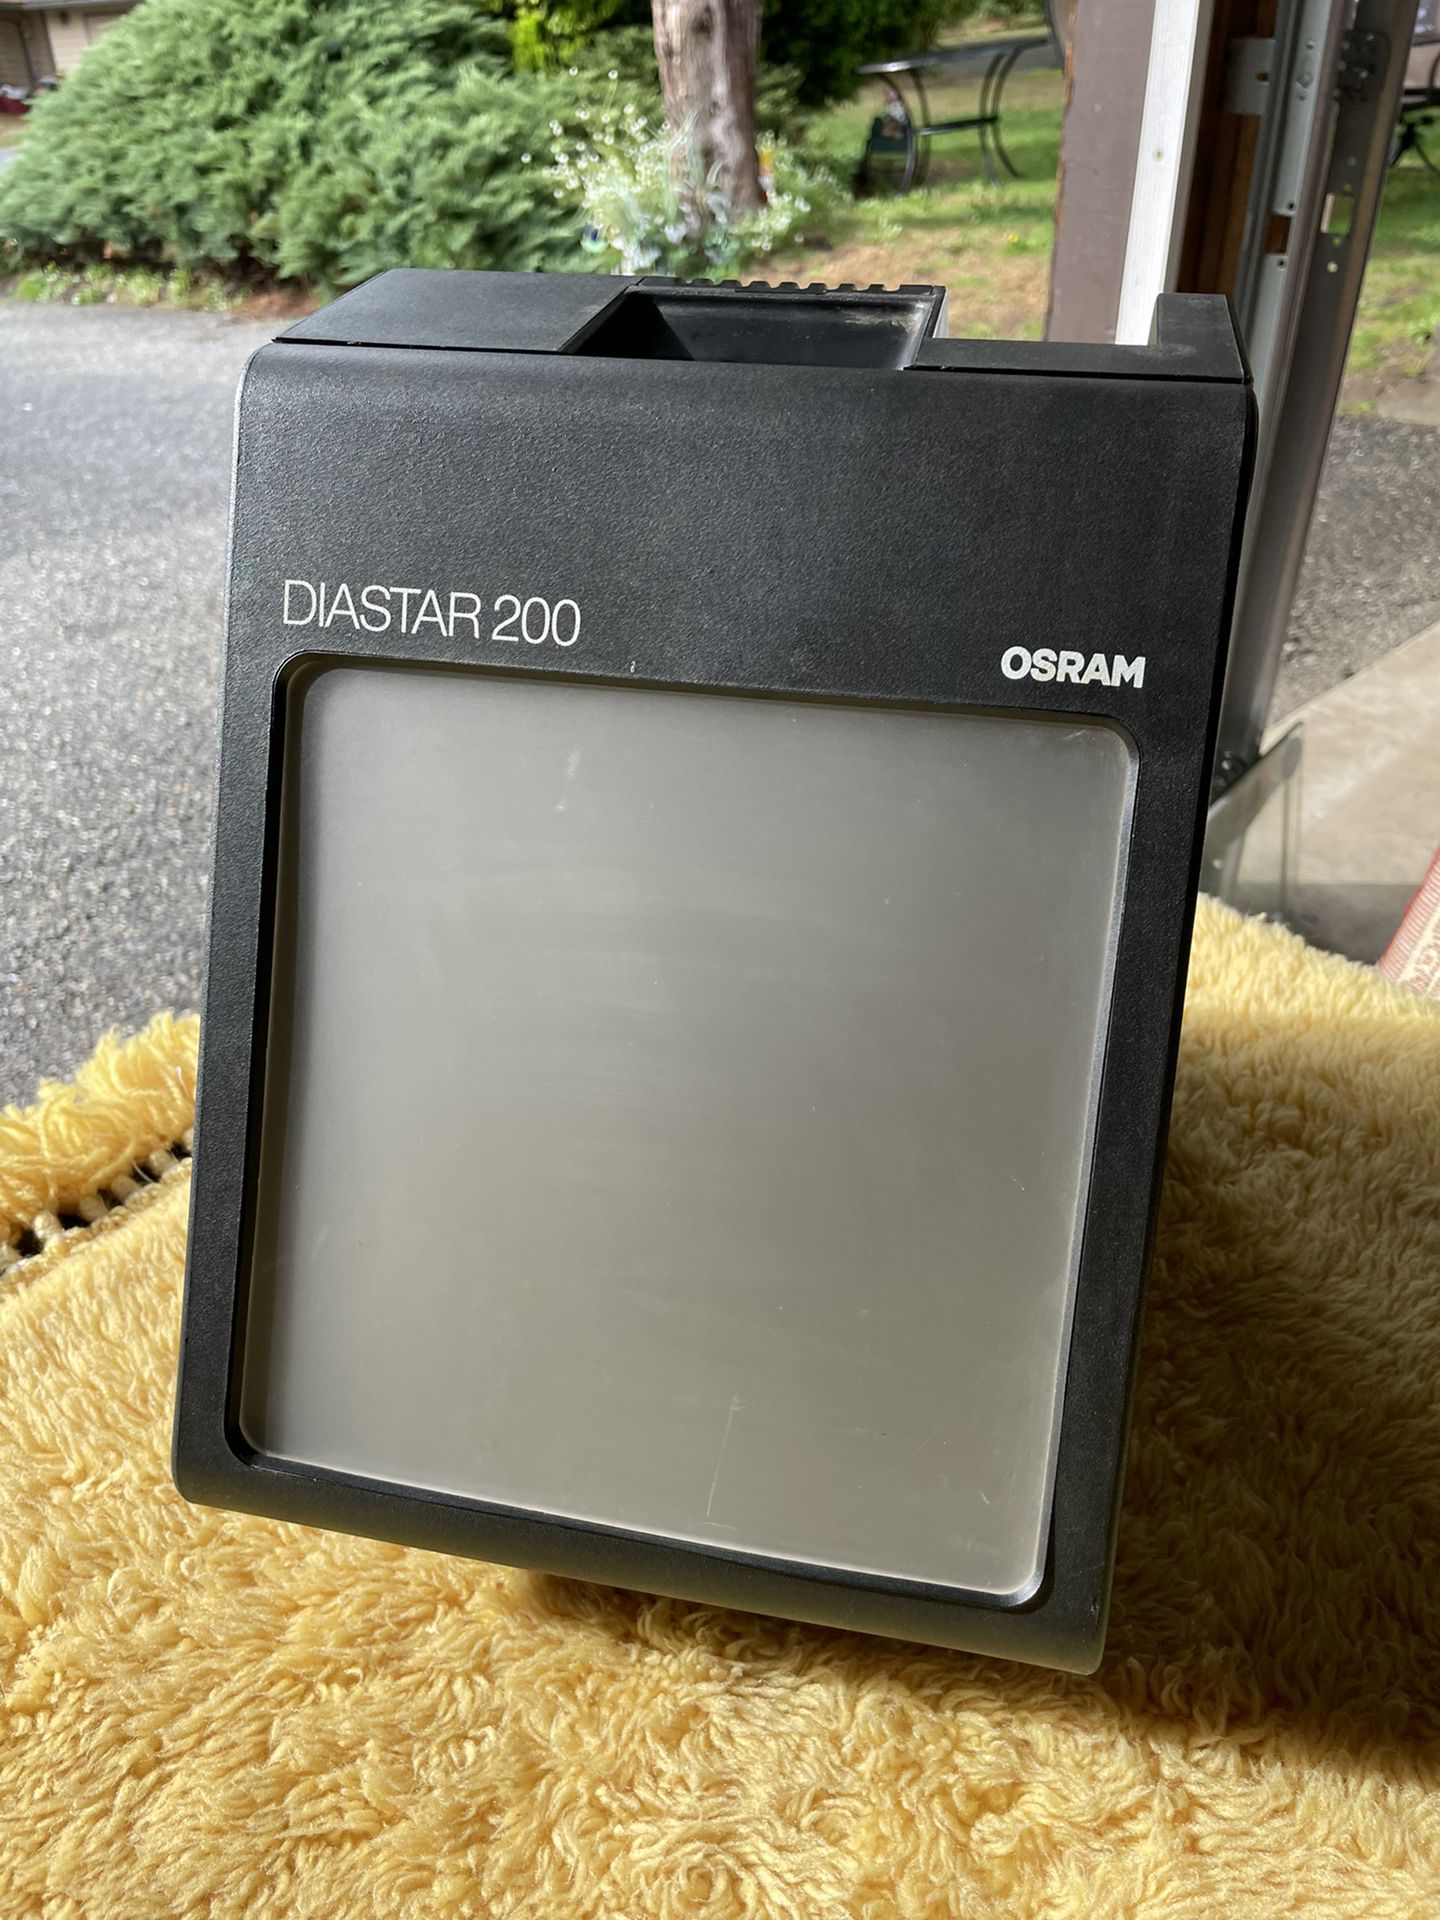 Vintage Osram Diastar 200 Slide Viewer Focus And Push Pull Automated Loading